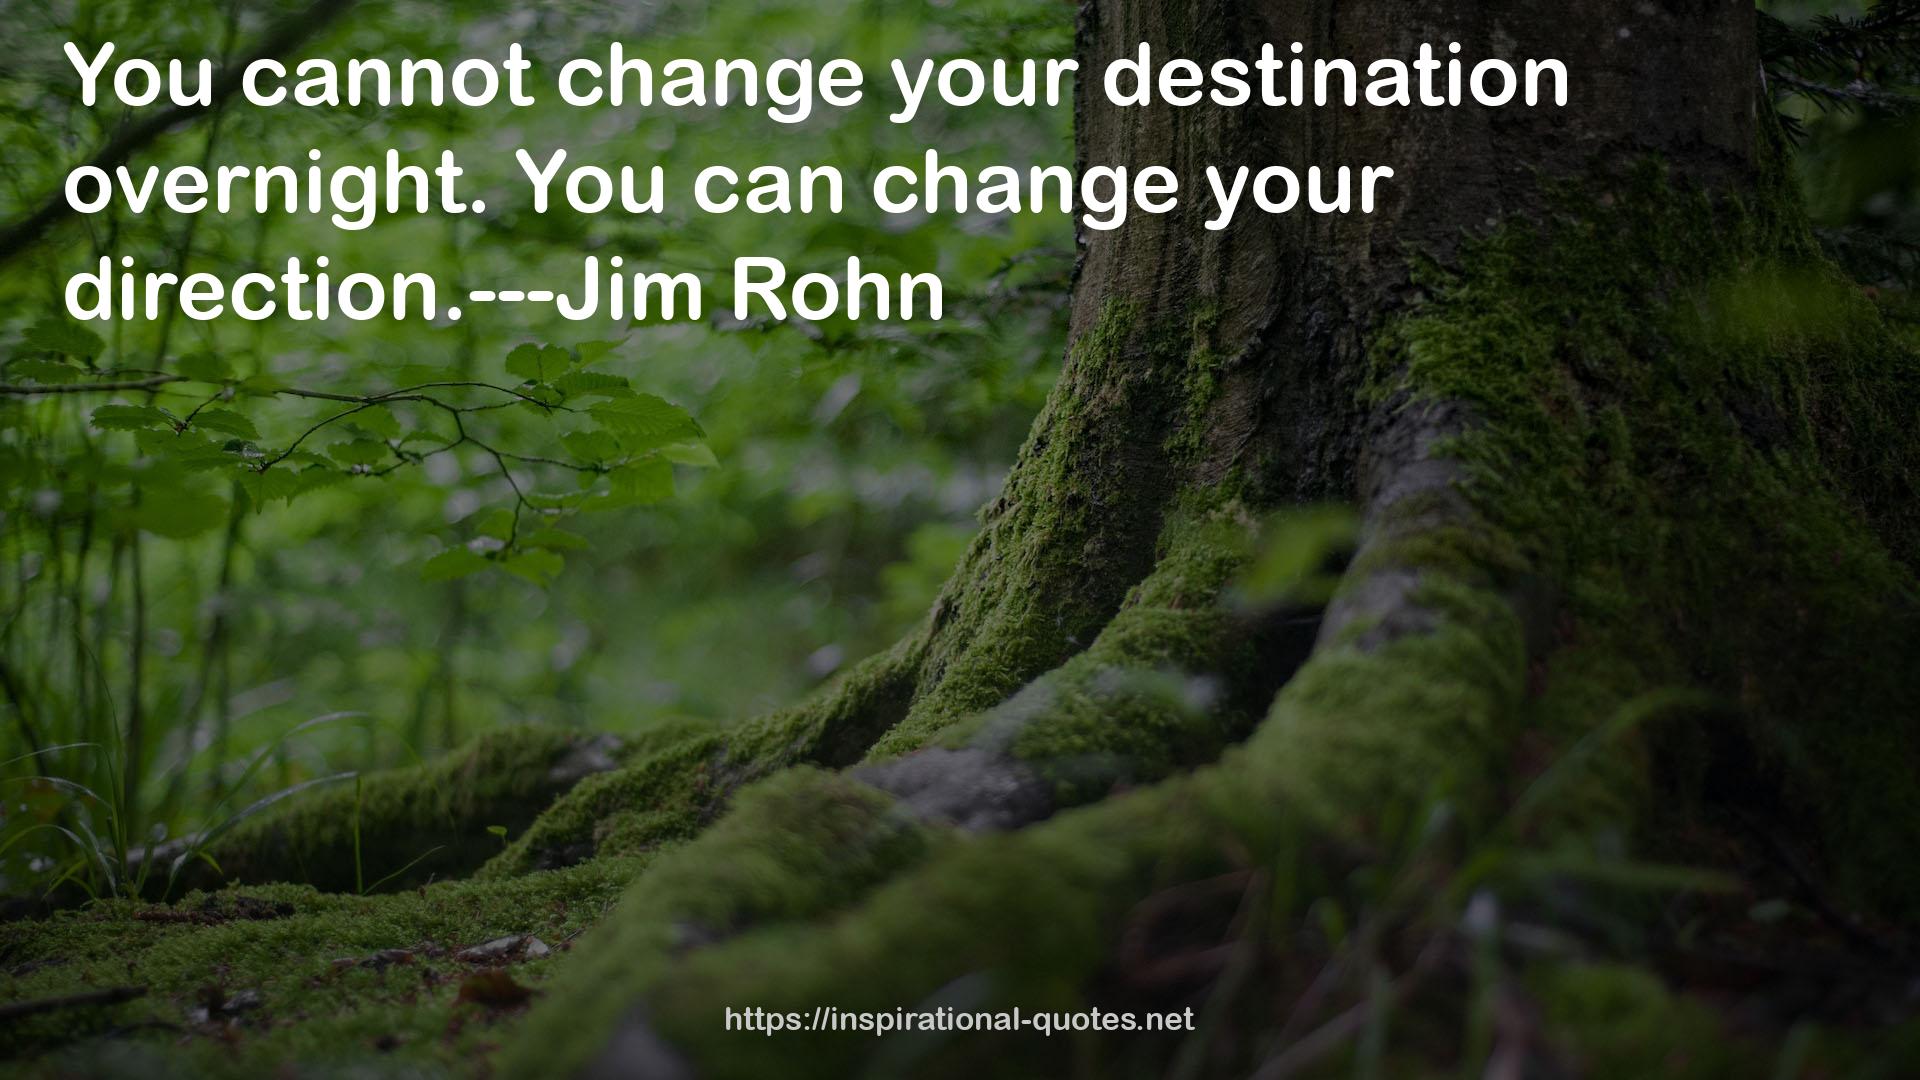 your direction.---Jim Rohn  QUOTES